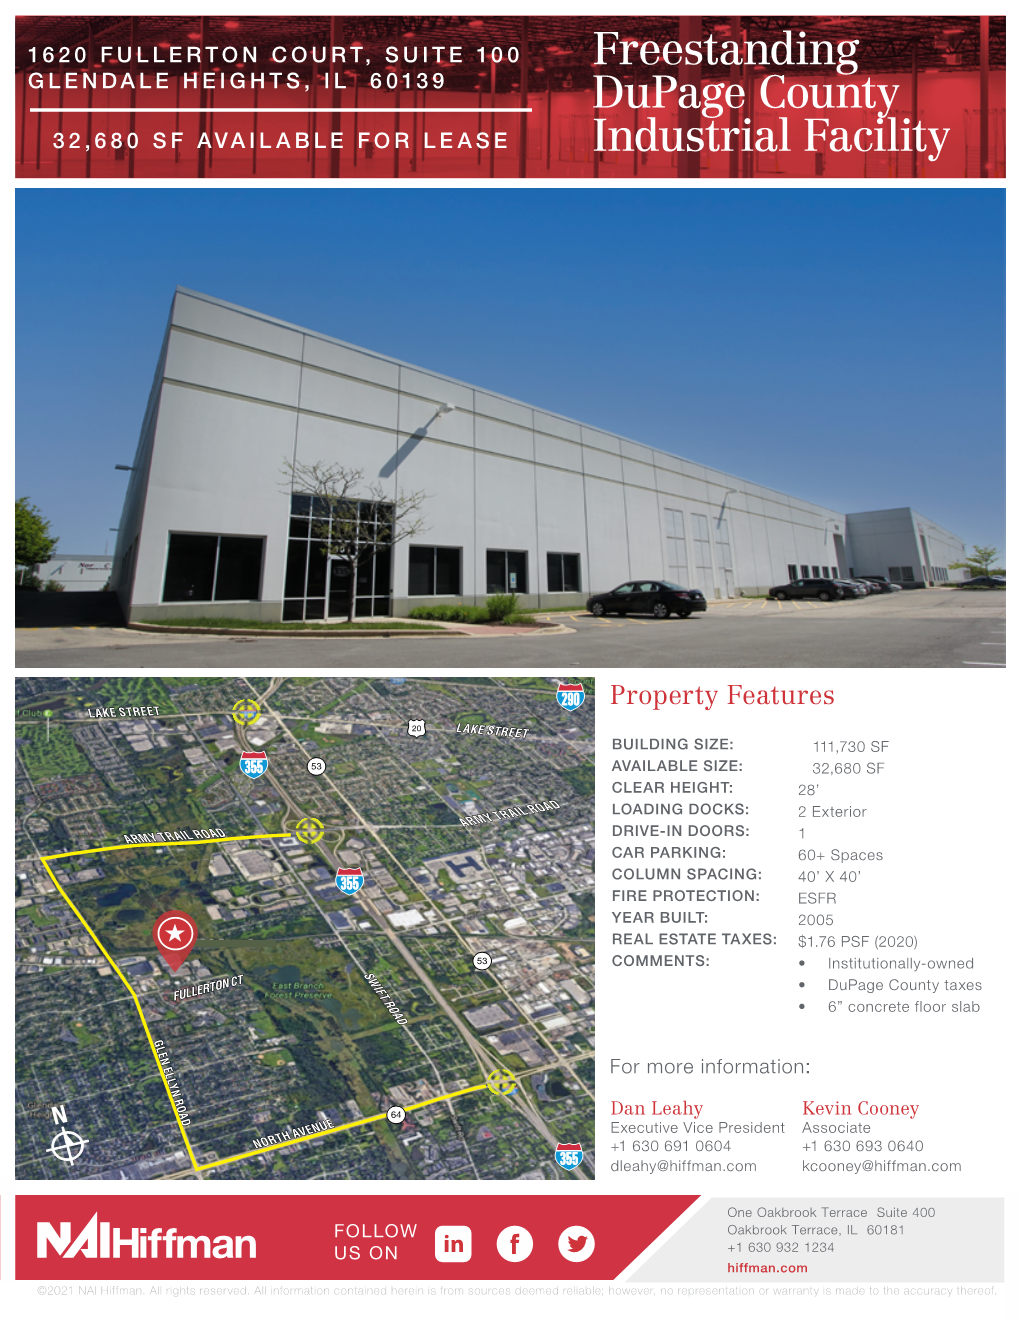 Freestanding Dupage County Industrial Facility